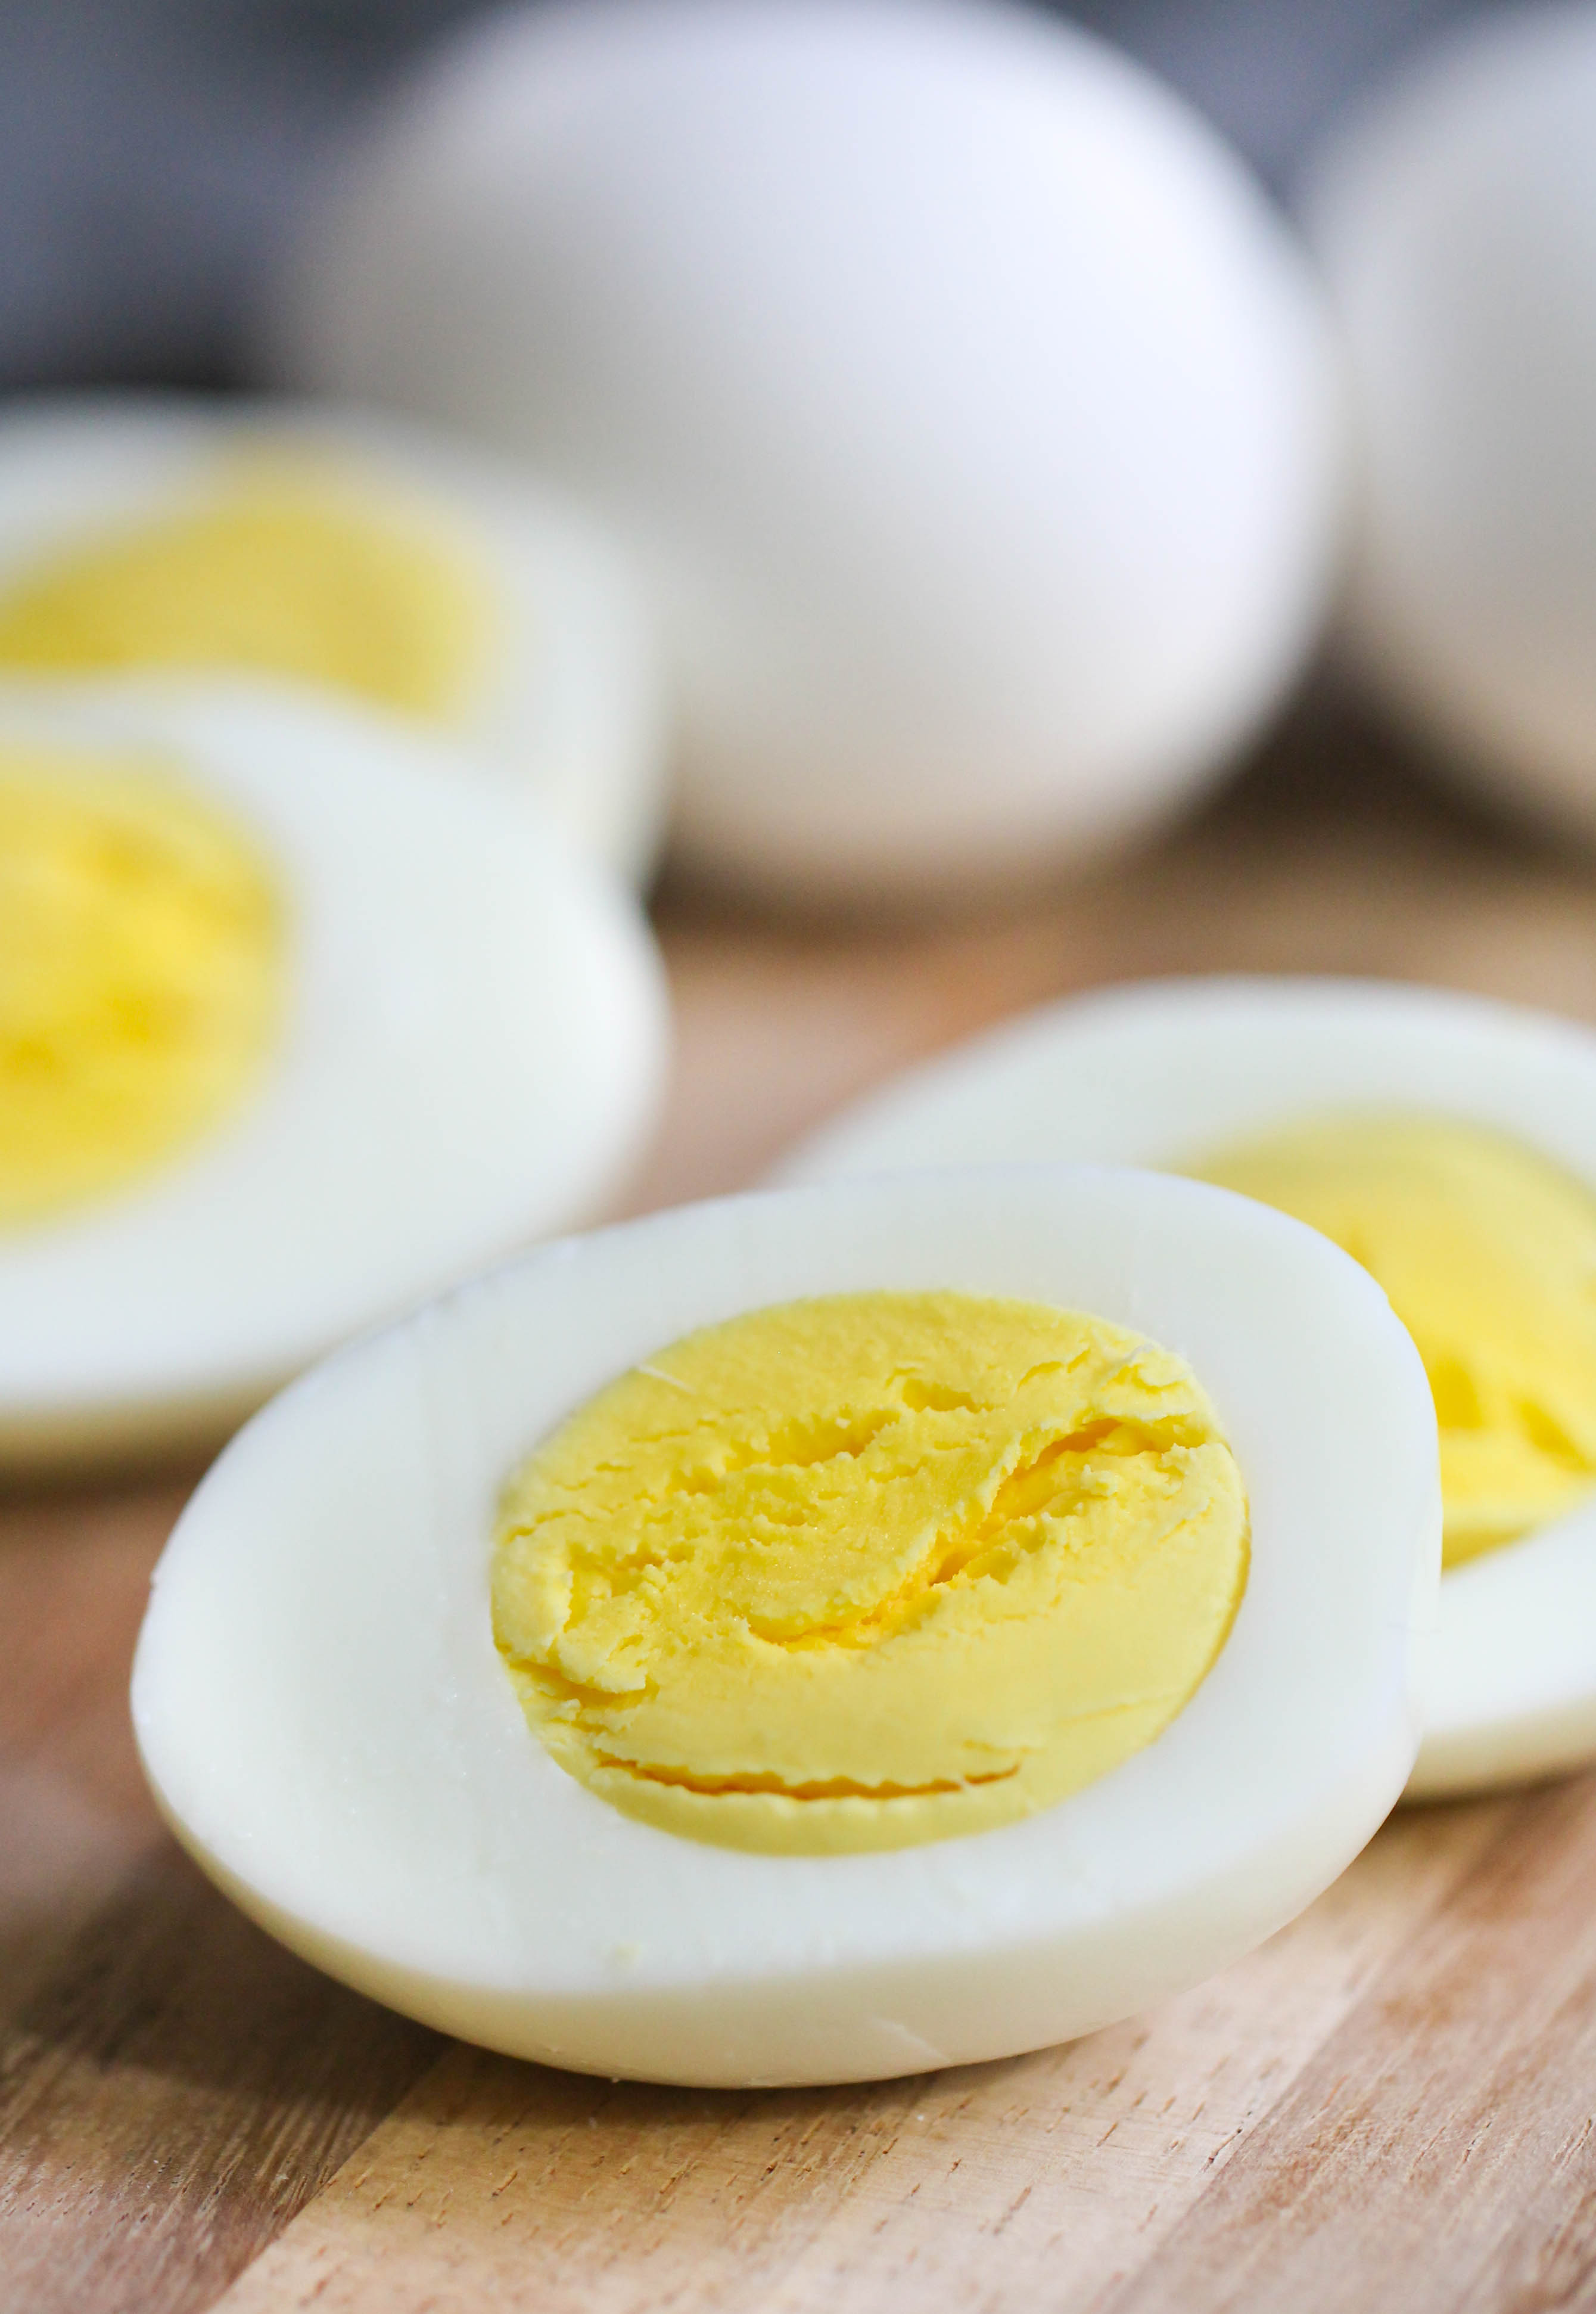 How to Cook Hard Boiled Eggs in the Instant Pot Recipe (5-5-5 Method)